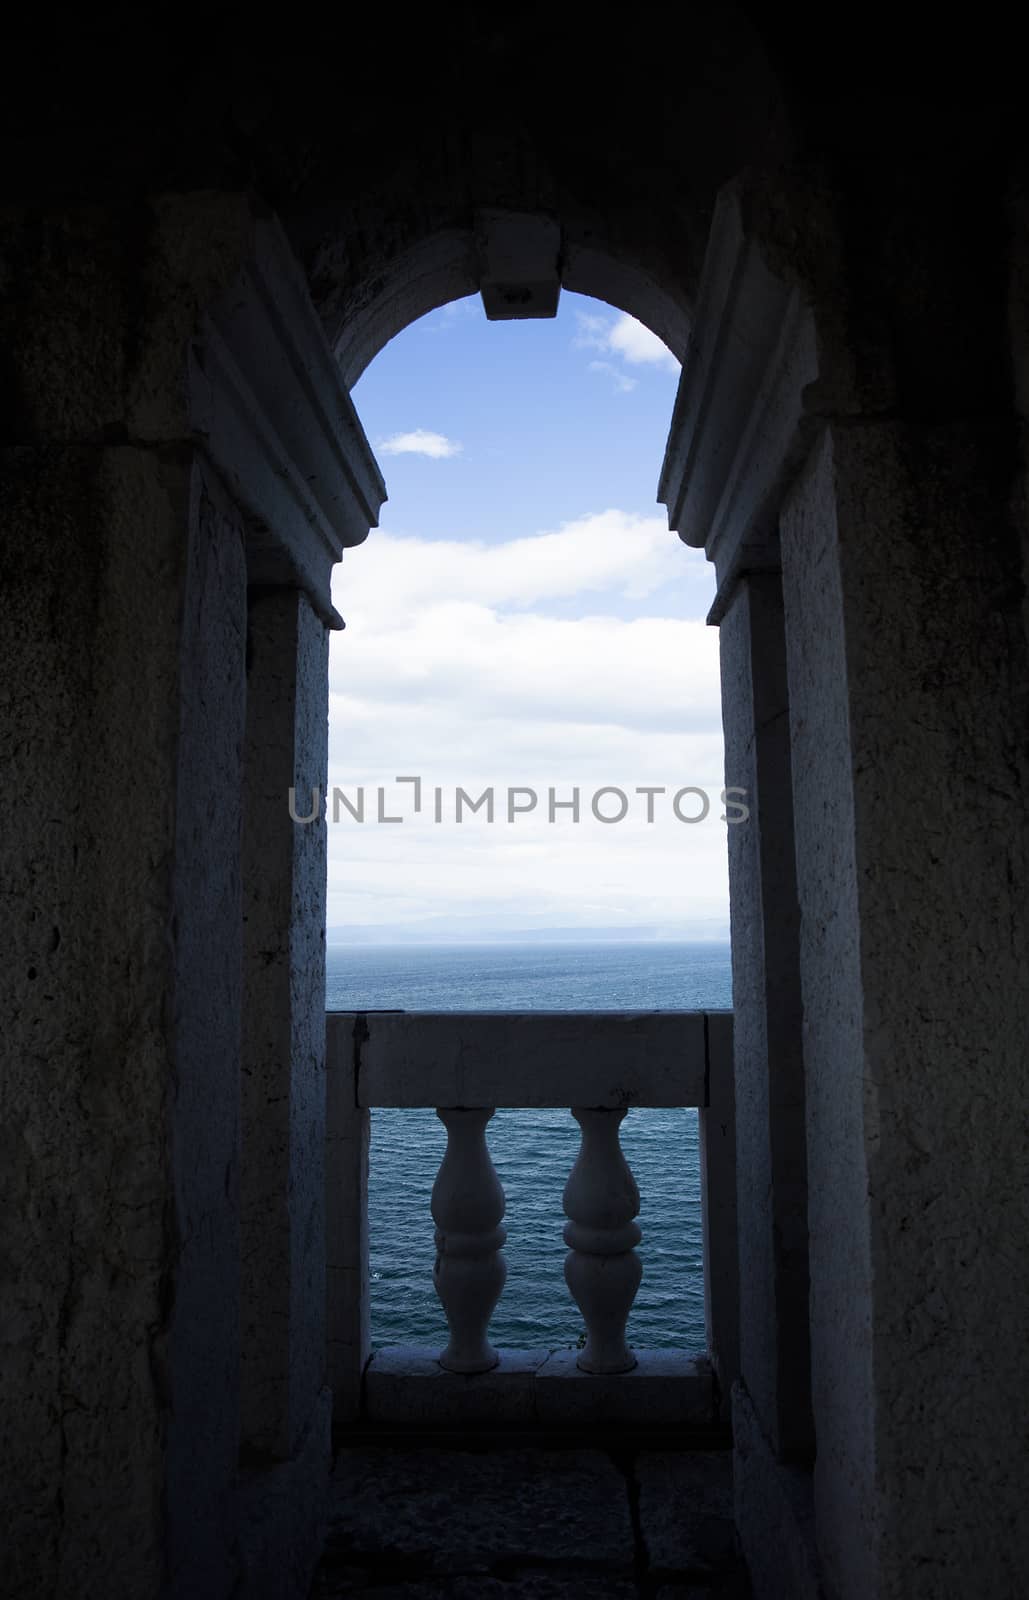 View of an ocean scene through archway